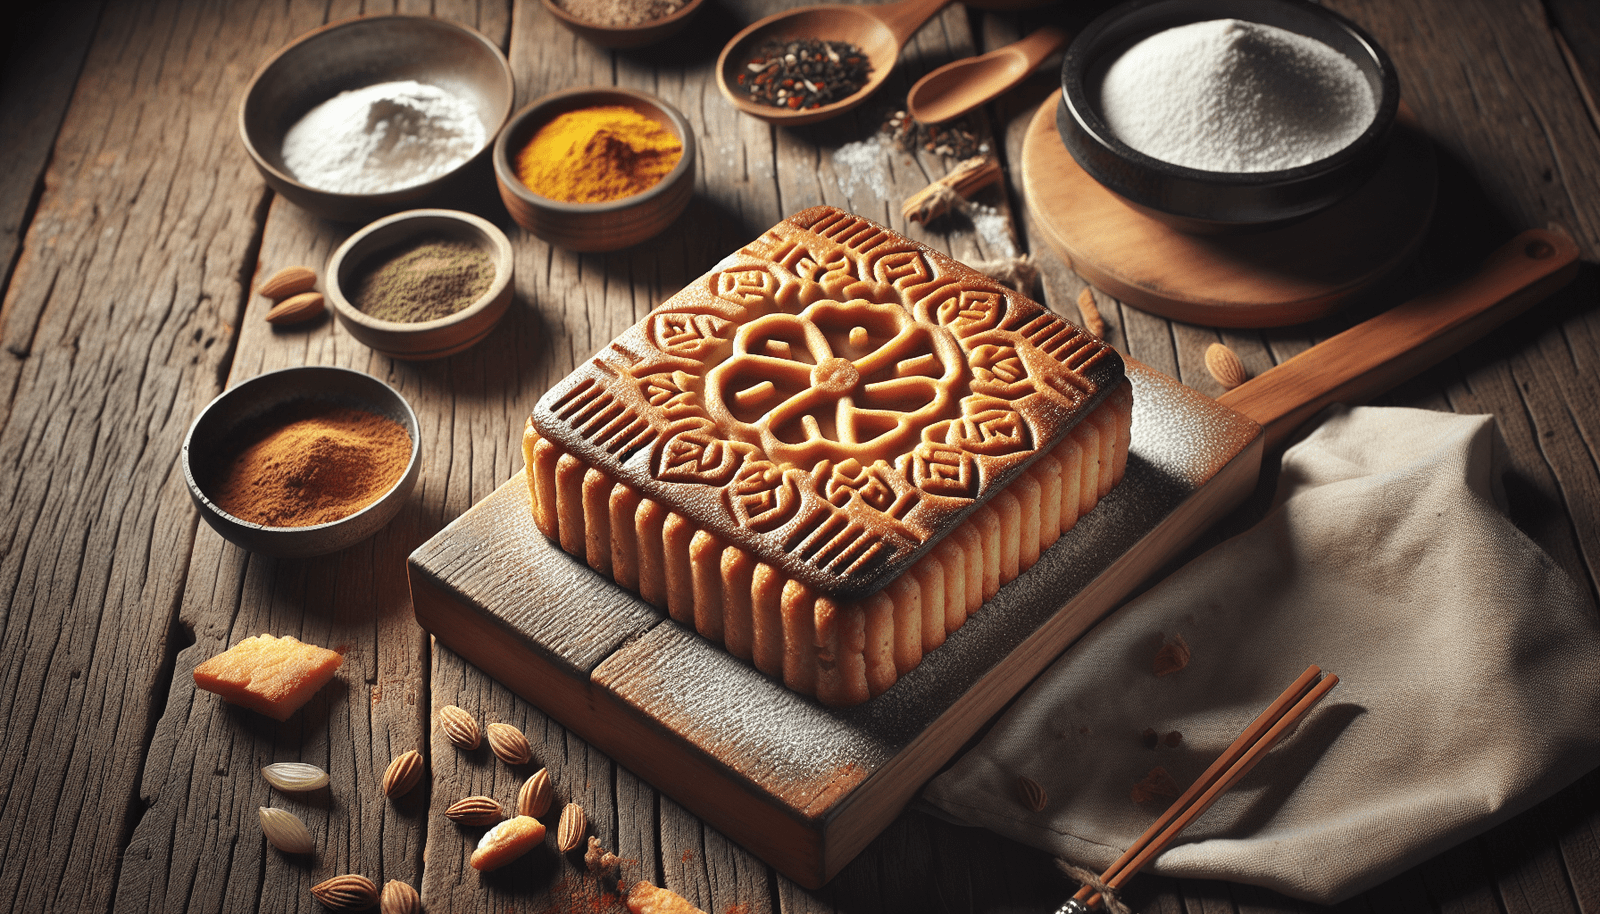 What Are The Emerging Trends In Using Korean Ingredients In Baking?